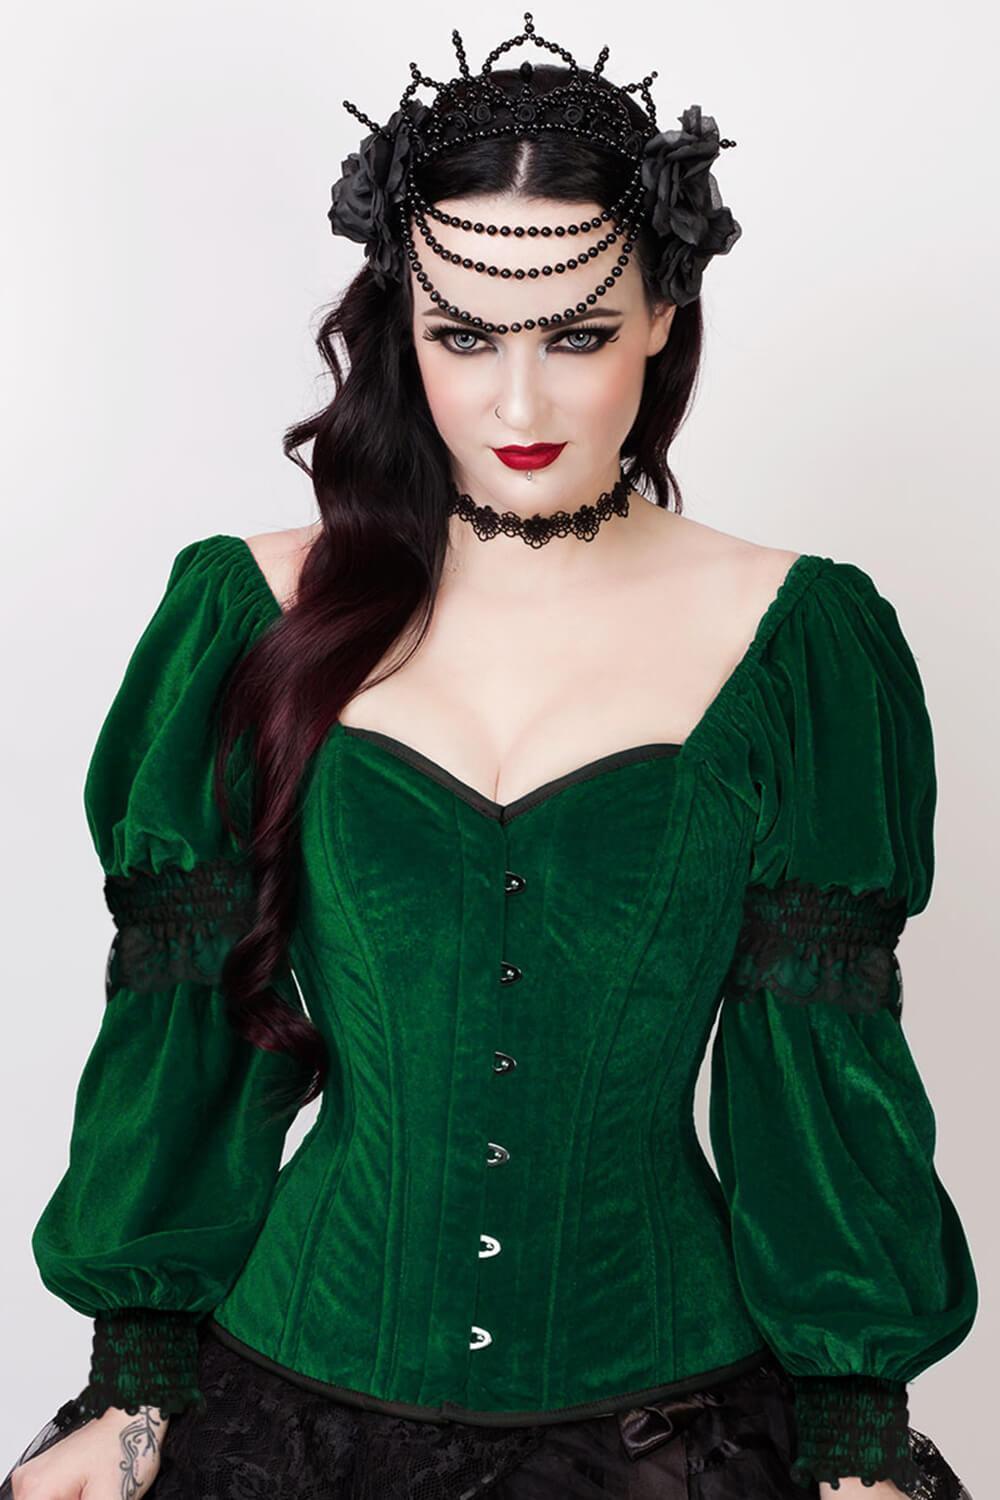 We are the best seller in Bespoke Corsets and Plus Size Corset